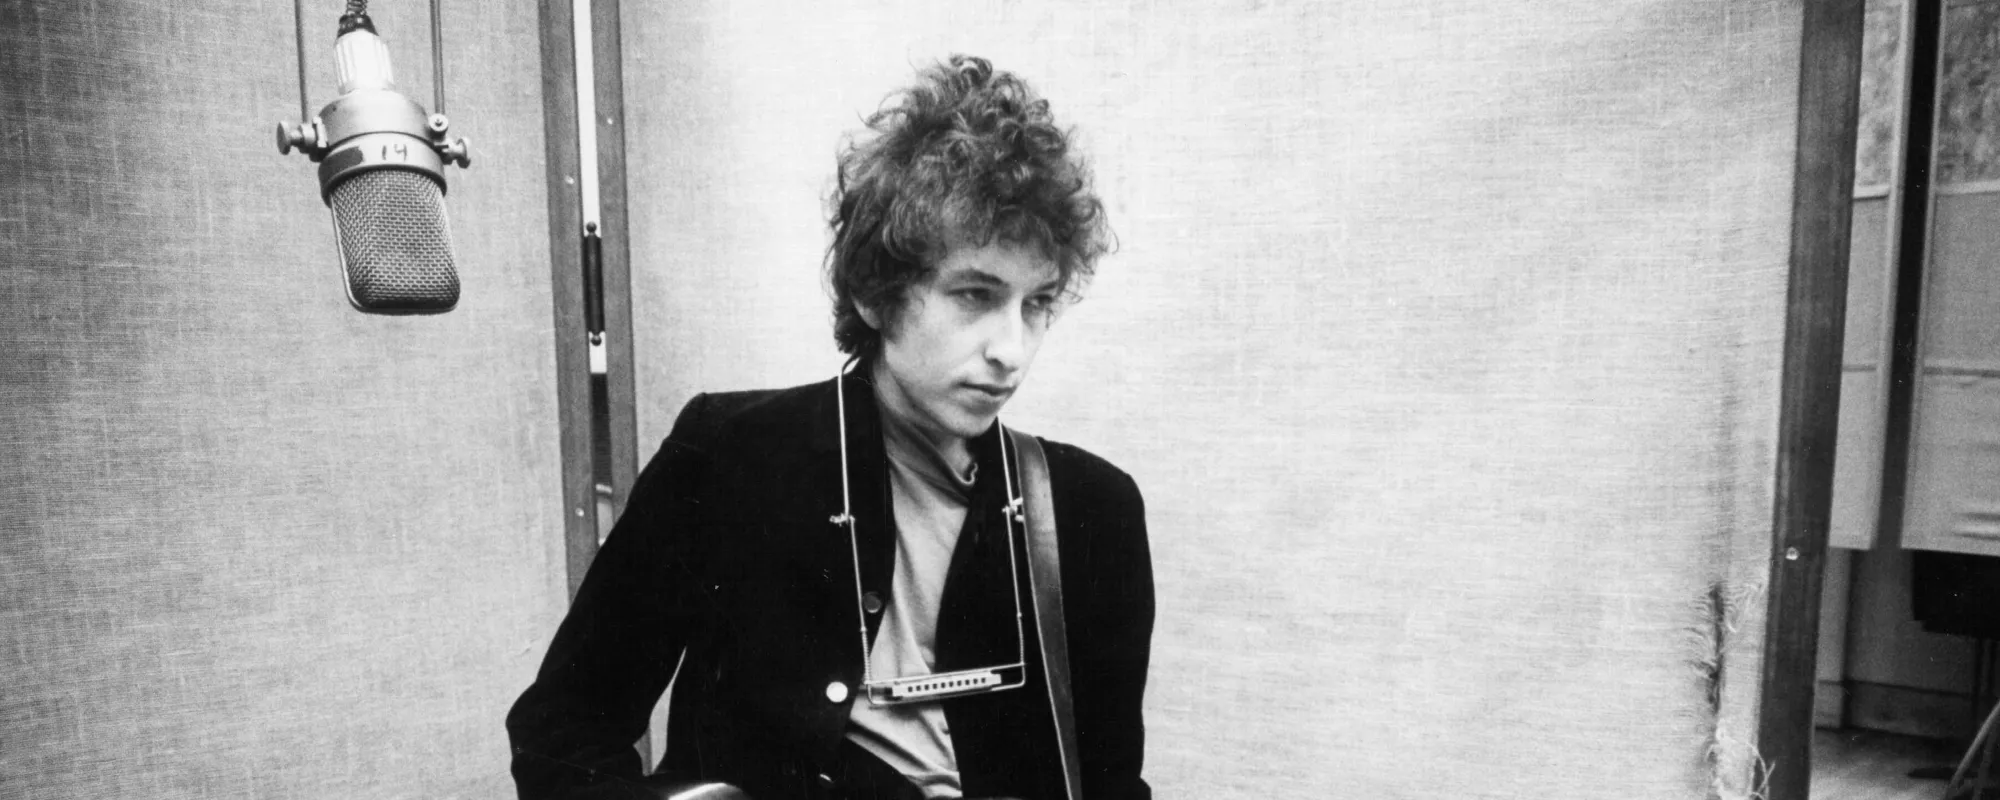 The Story and Meaning Behind “Subterranean Homesick Blues” by Bob Dylan